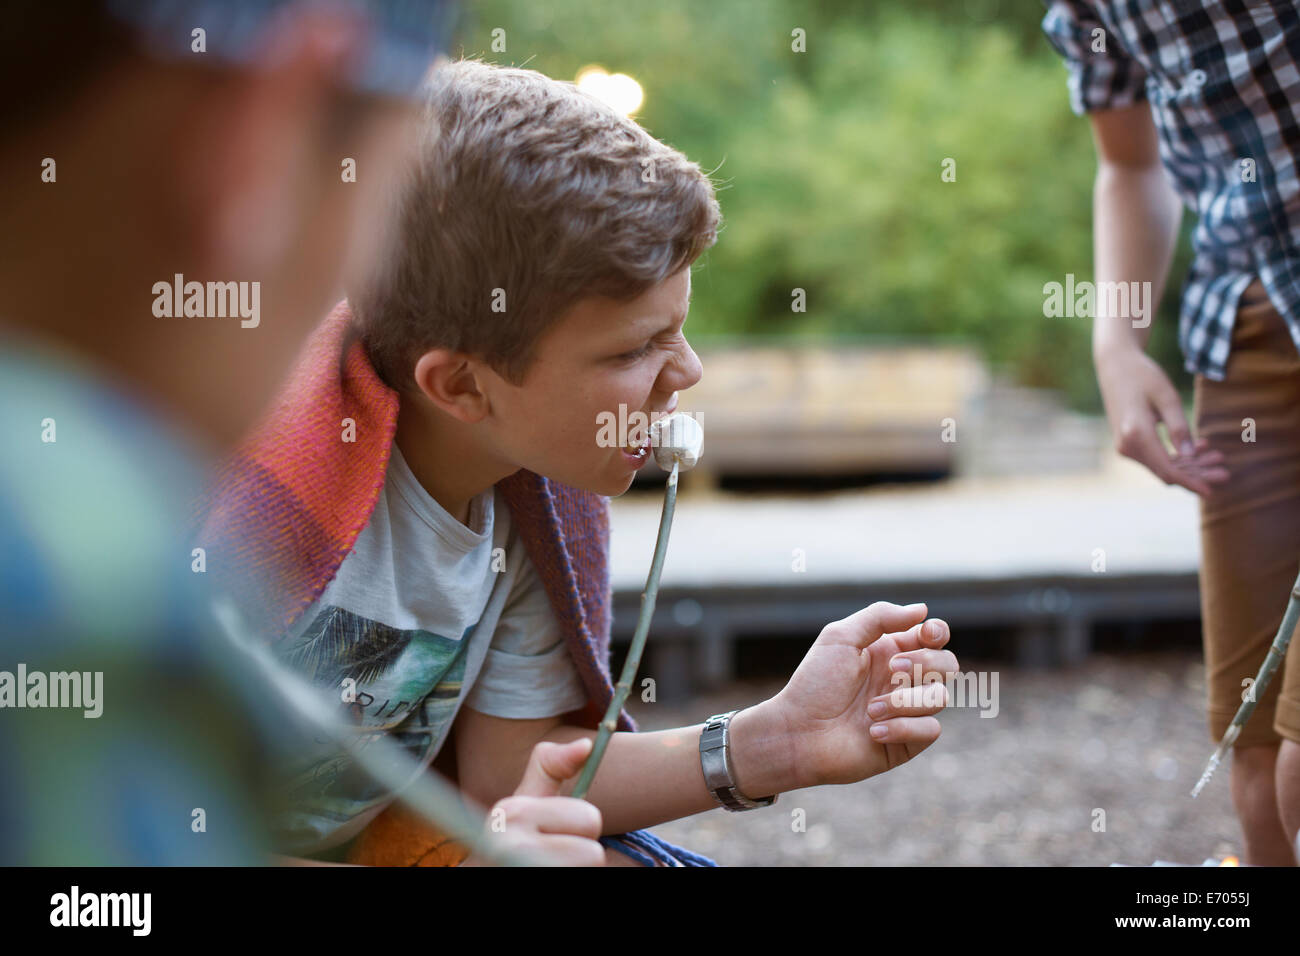 Young boy eating toasted marshmallow from stick Stock Photo